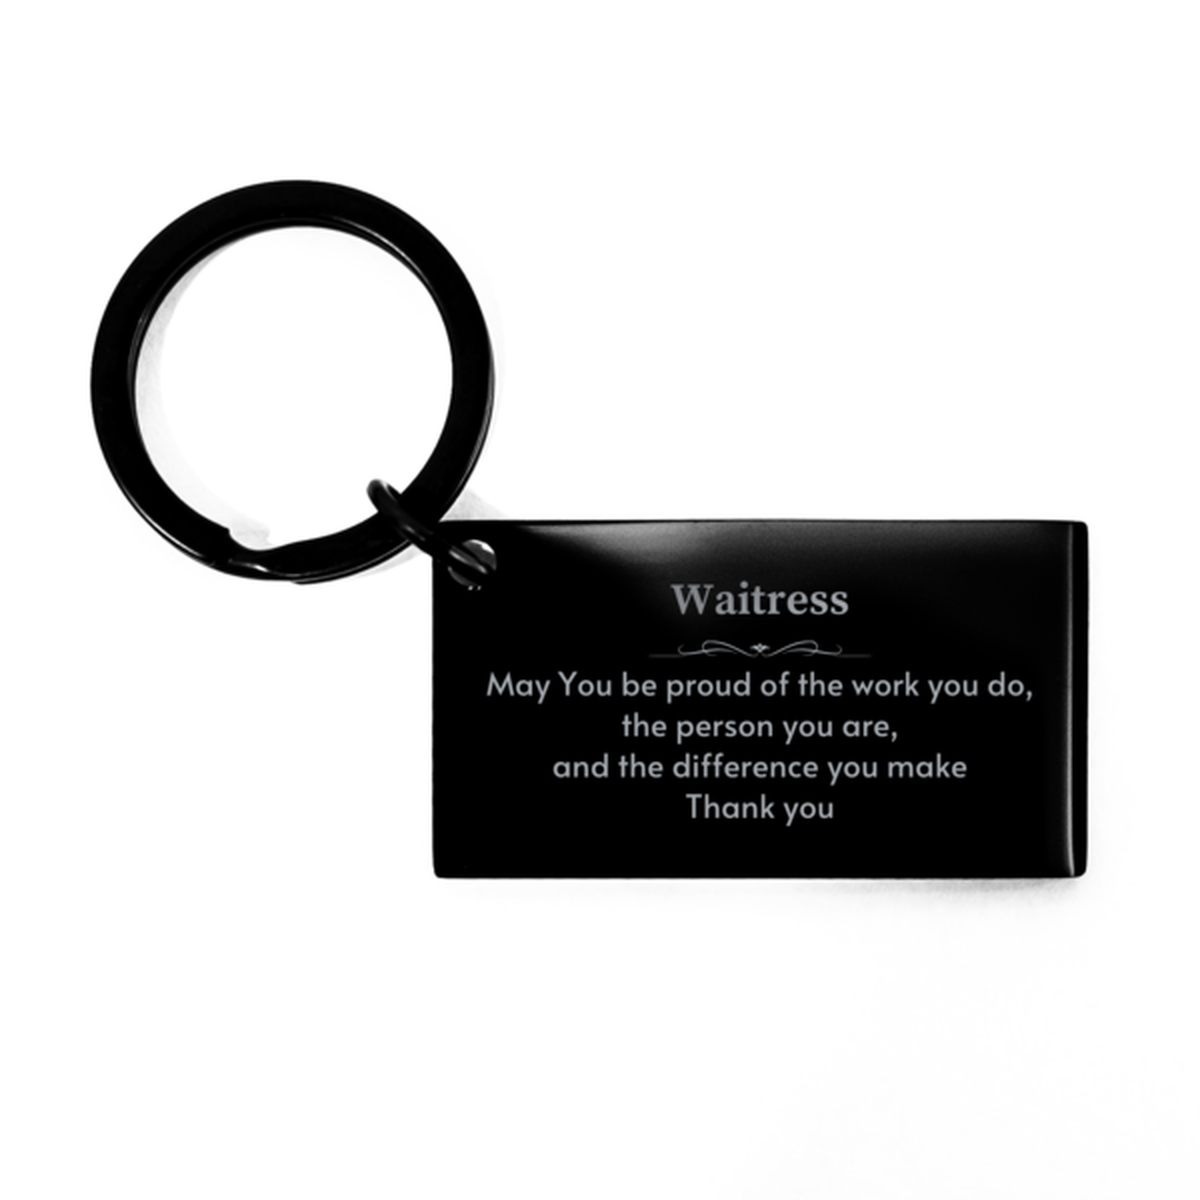 Heartwarming Keychain Retirement Coworkers Gifts for Waitress, Apartment Manager May You be proud of the work you do, the person you are Gifts for Boss Men Women Friends